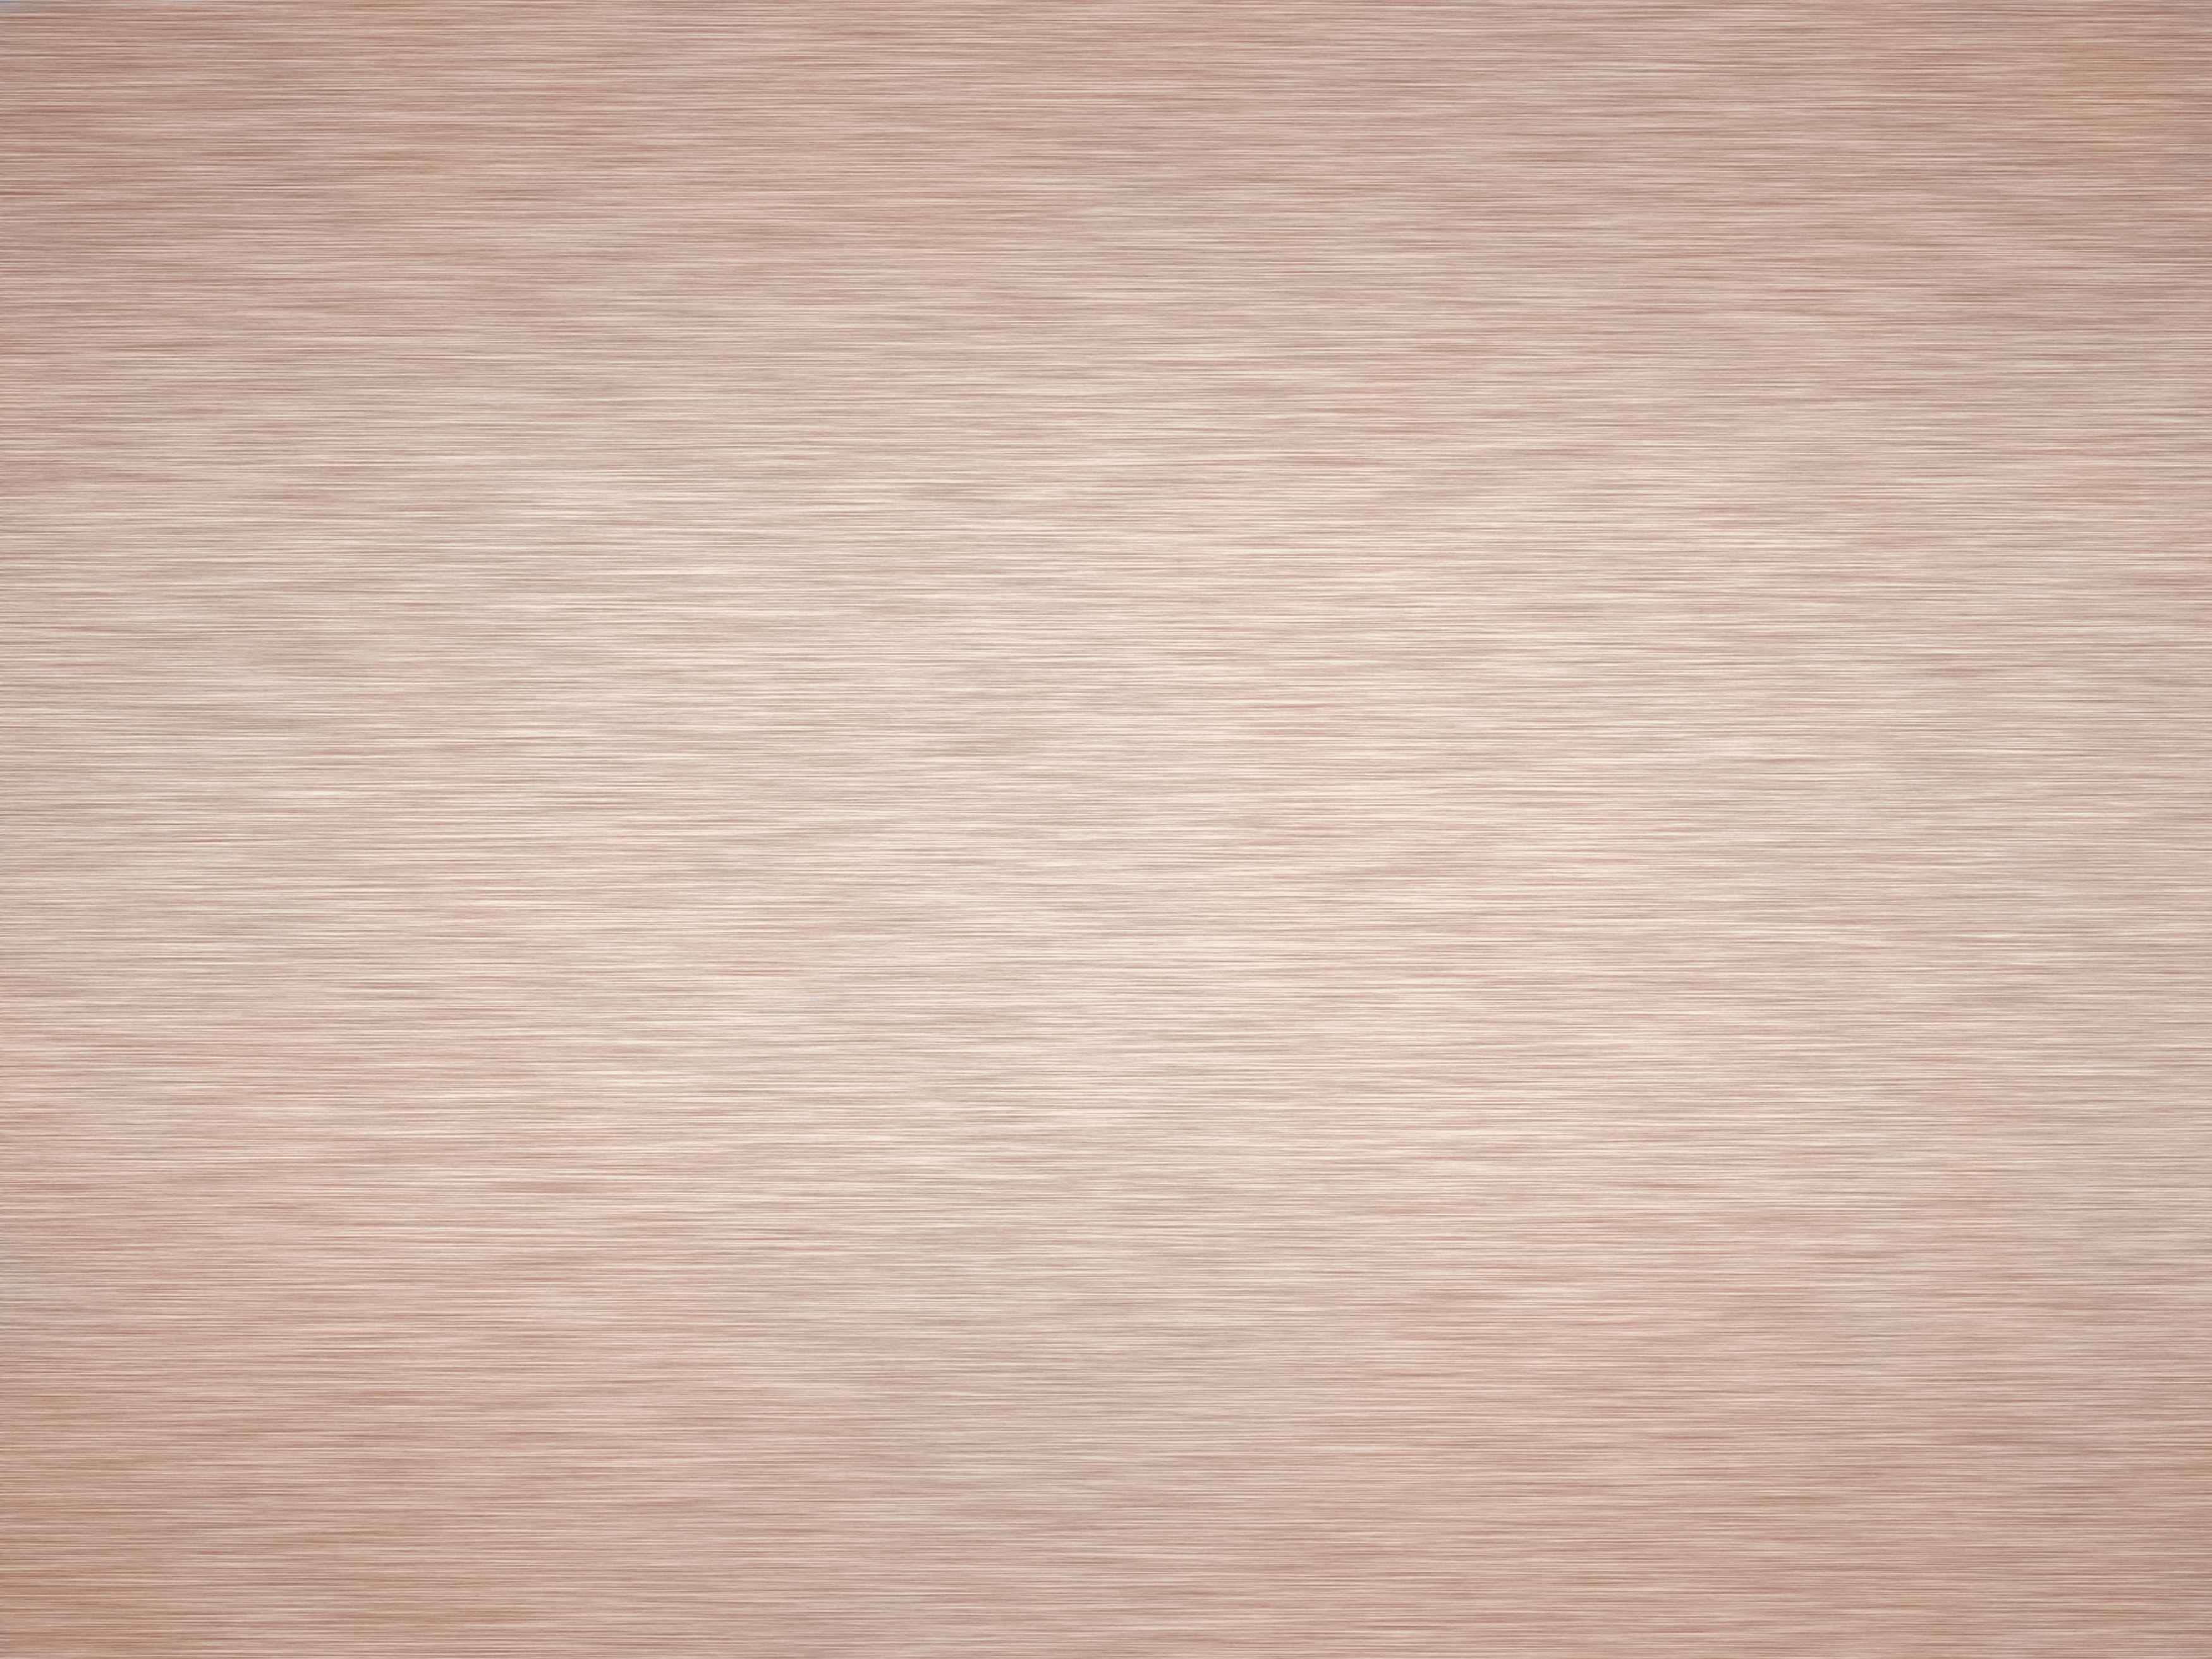 Red Brushed Metal Texture Copper Background